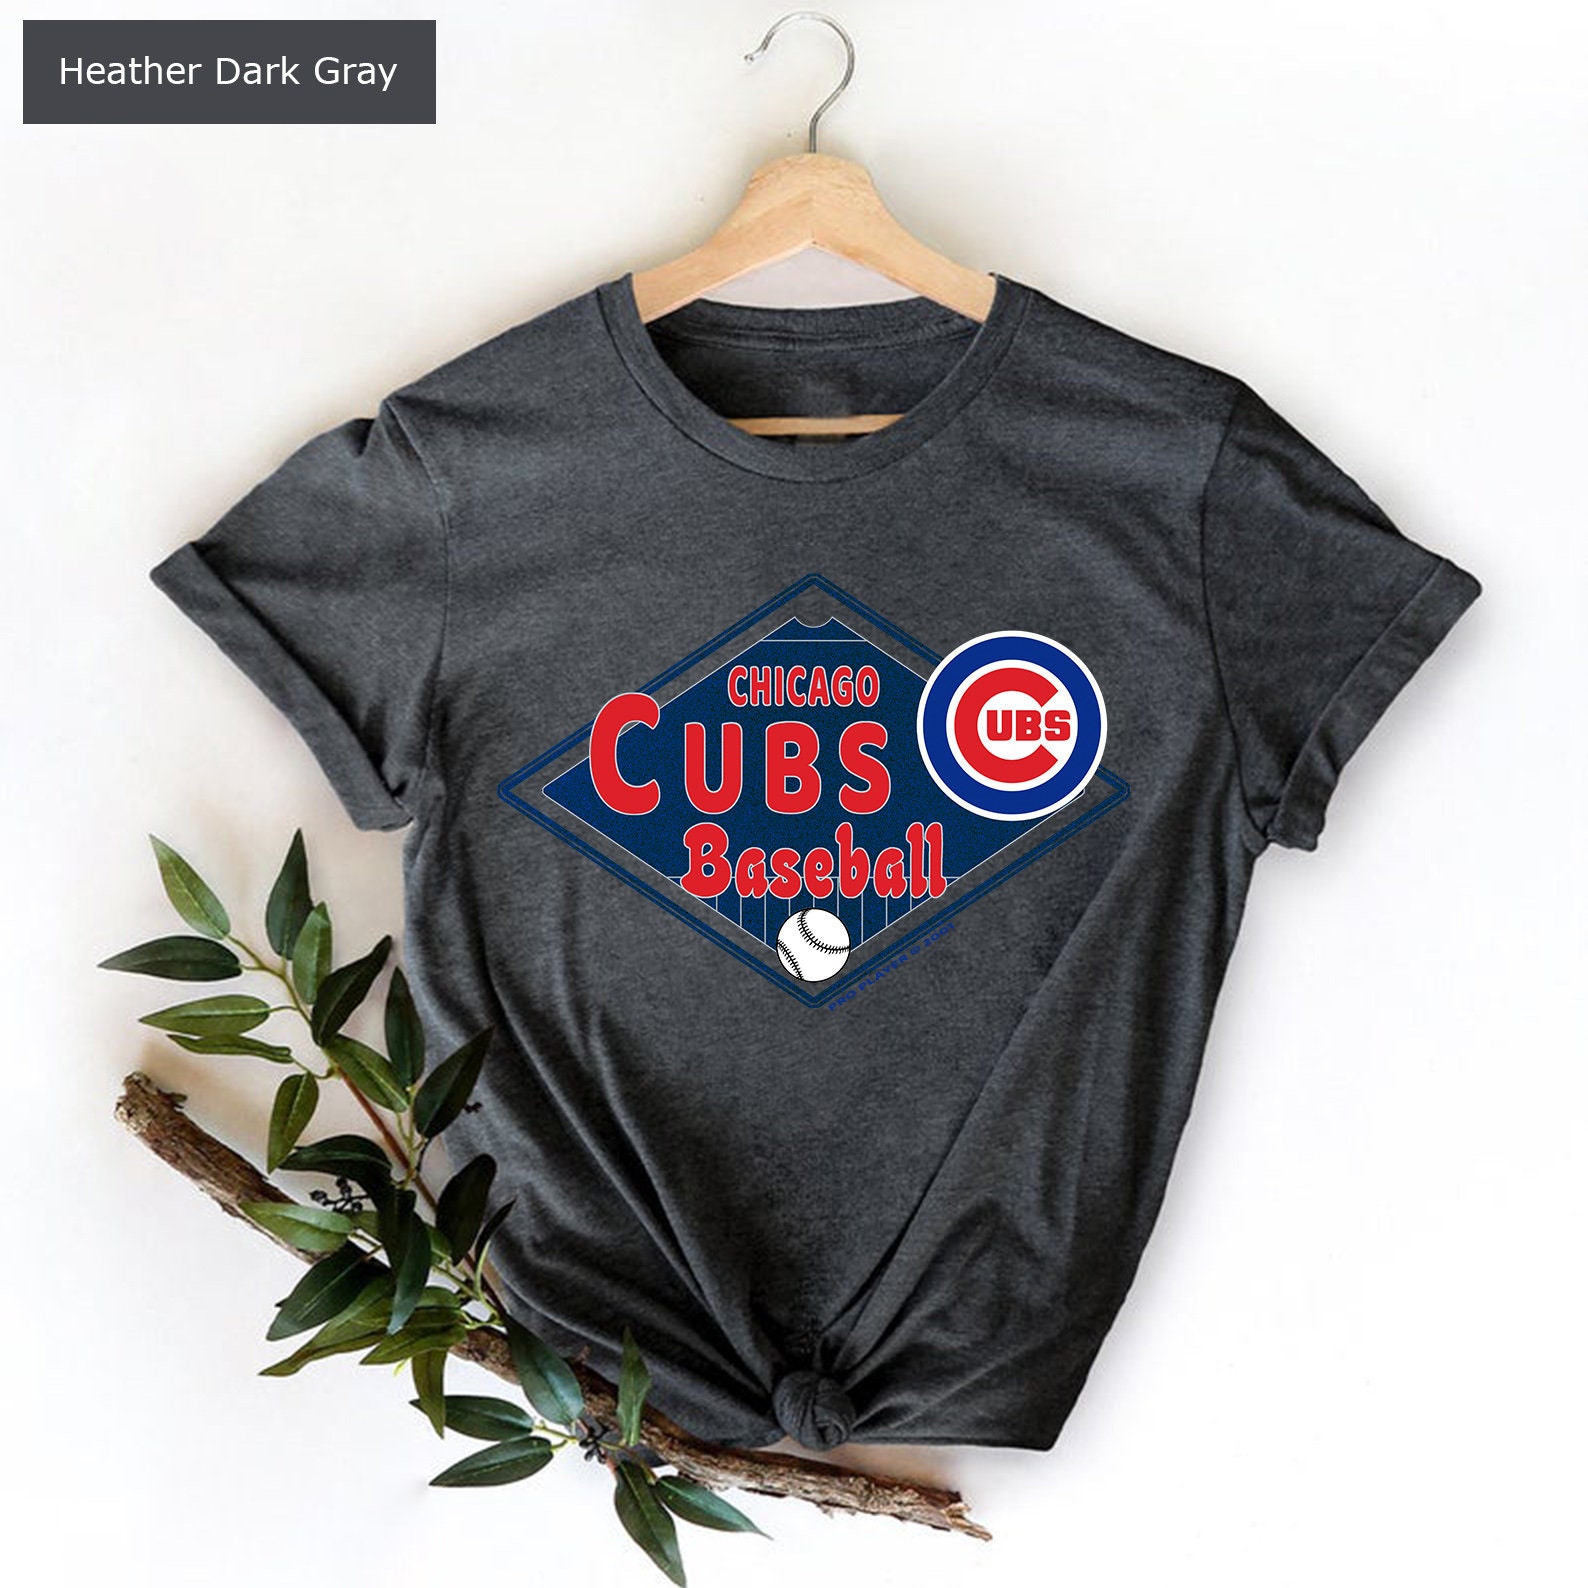 Hey Cubs! Make This Great-Looking Jersey Your Primary Road Look In